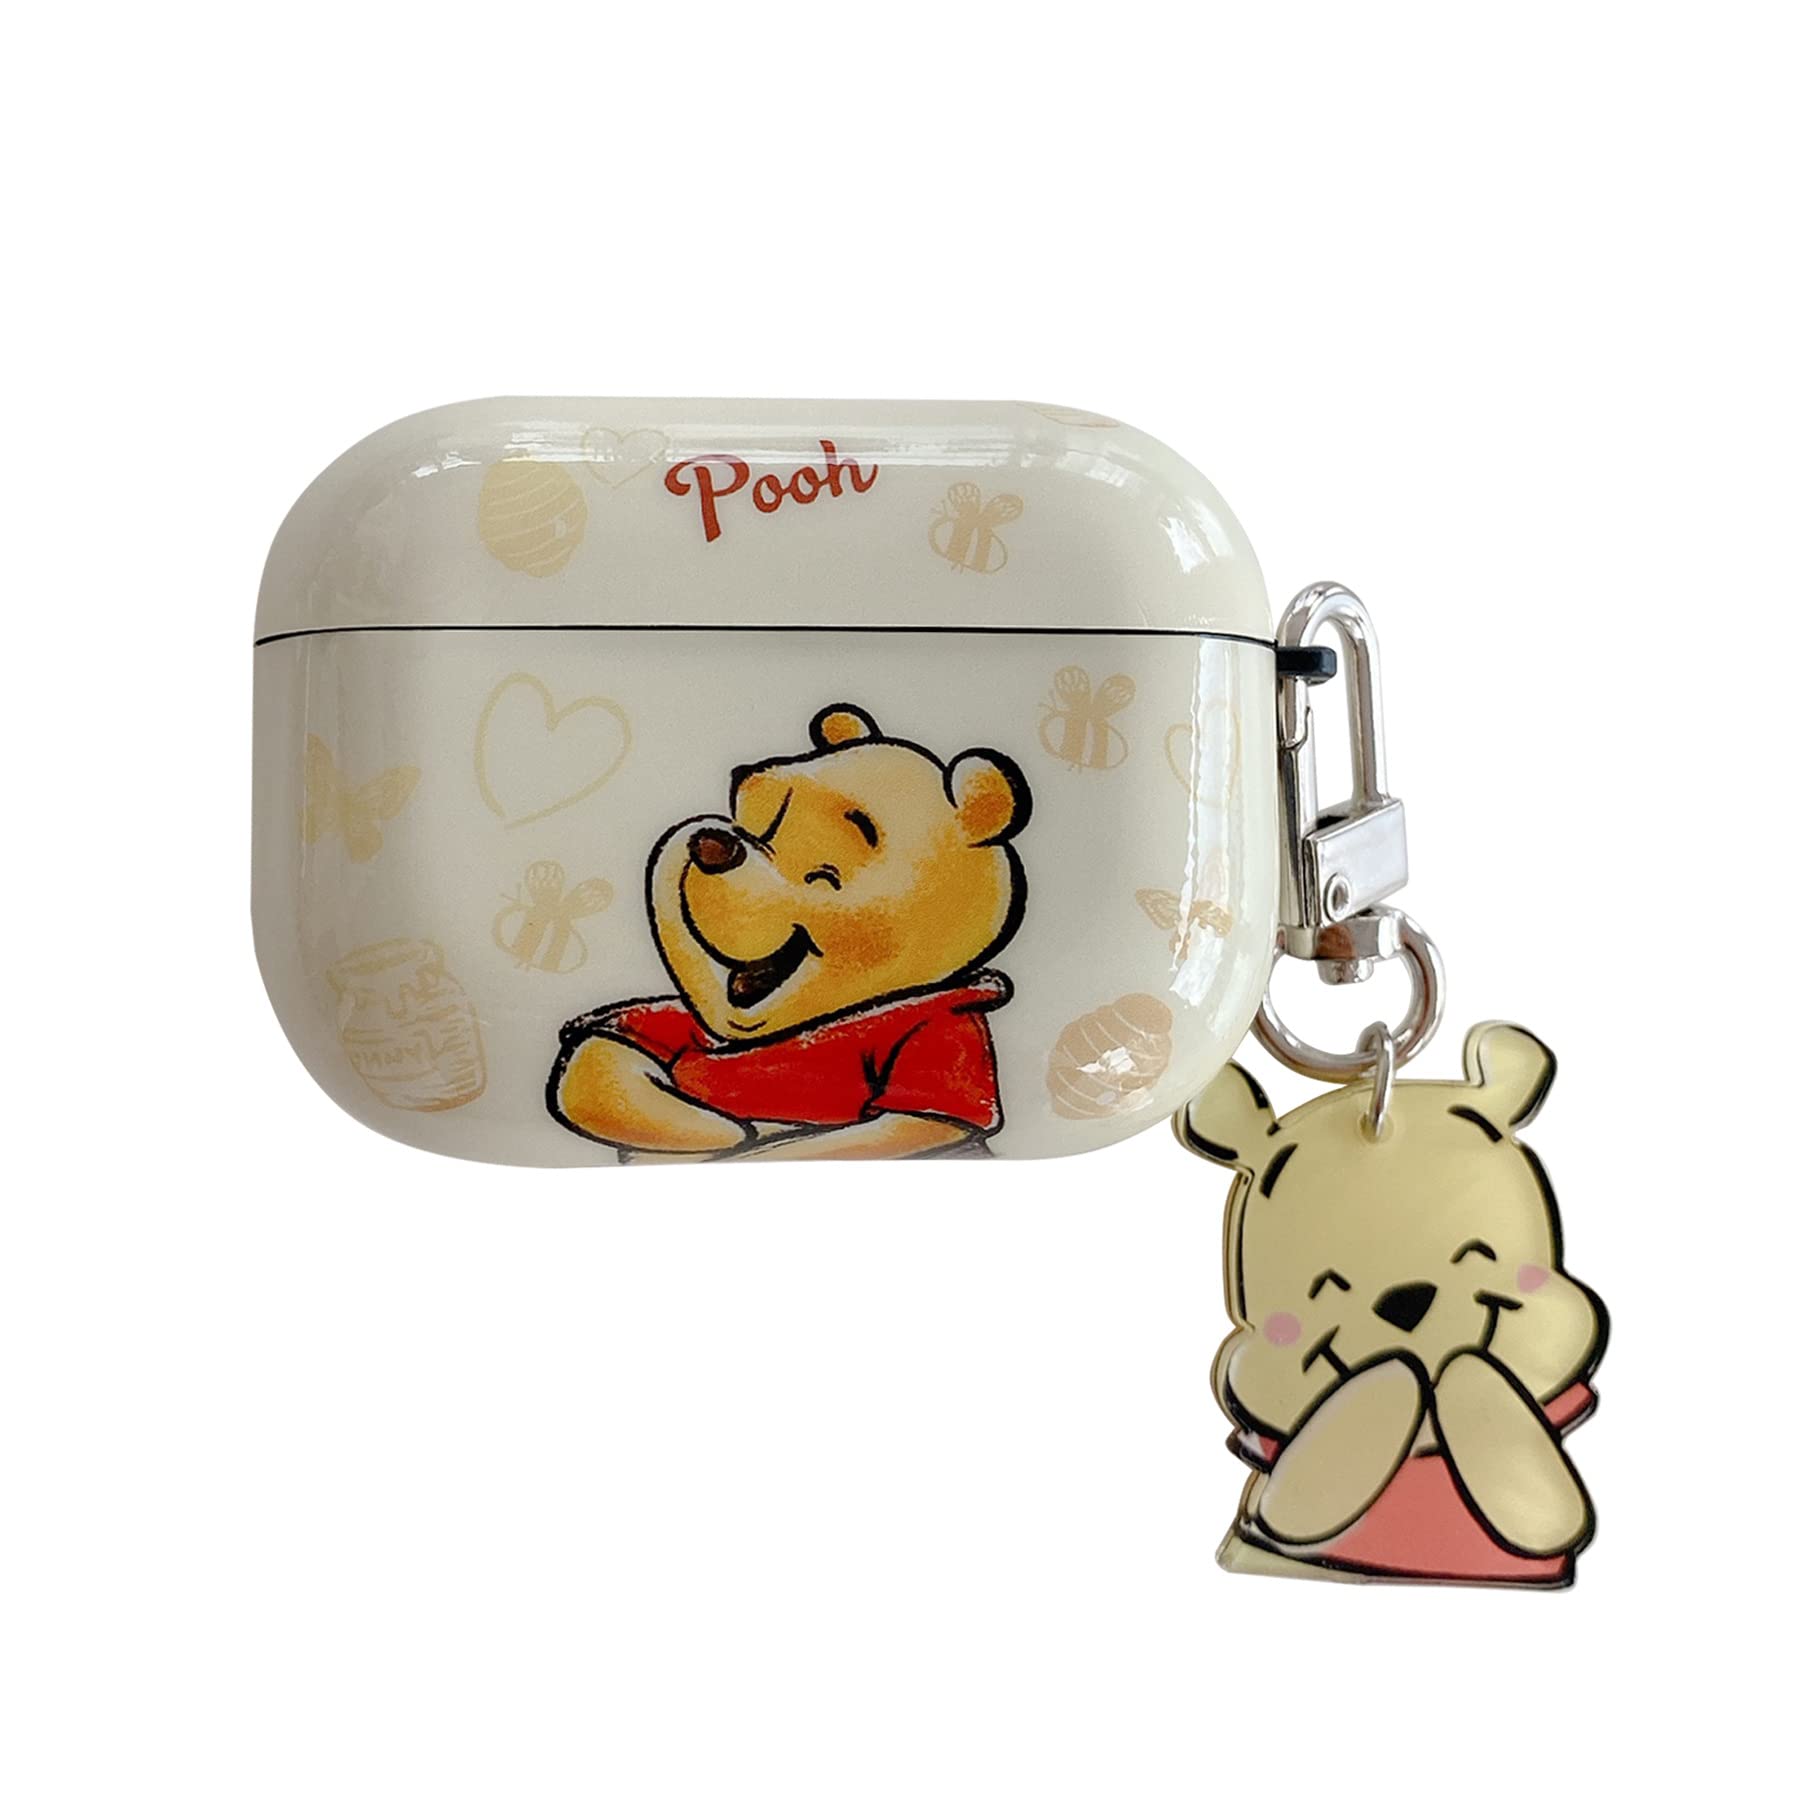 ChillNChic Soft Tpu Case With Charm And Keychain For Apple Airpods Pro 2019 Model Yellow Winnie The Pooh Bear Laugh Cute Lovely Adorable Ka